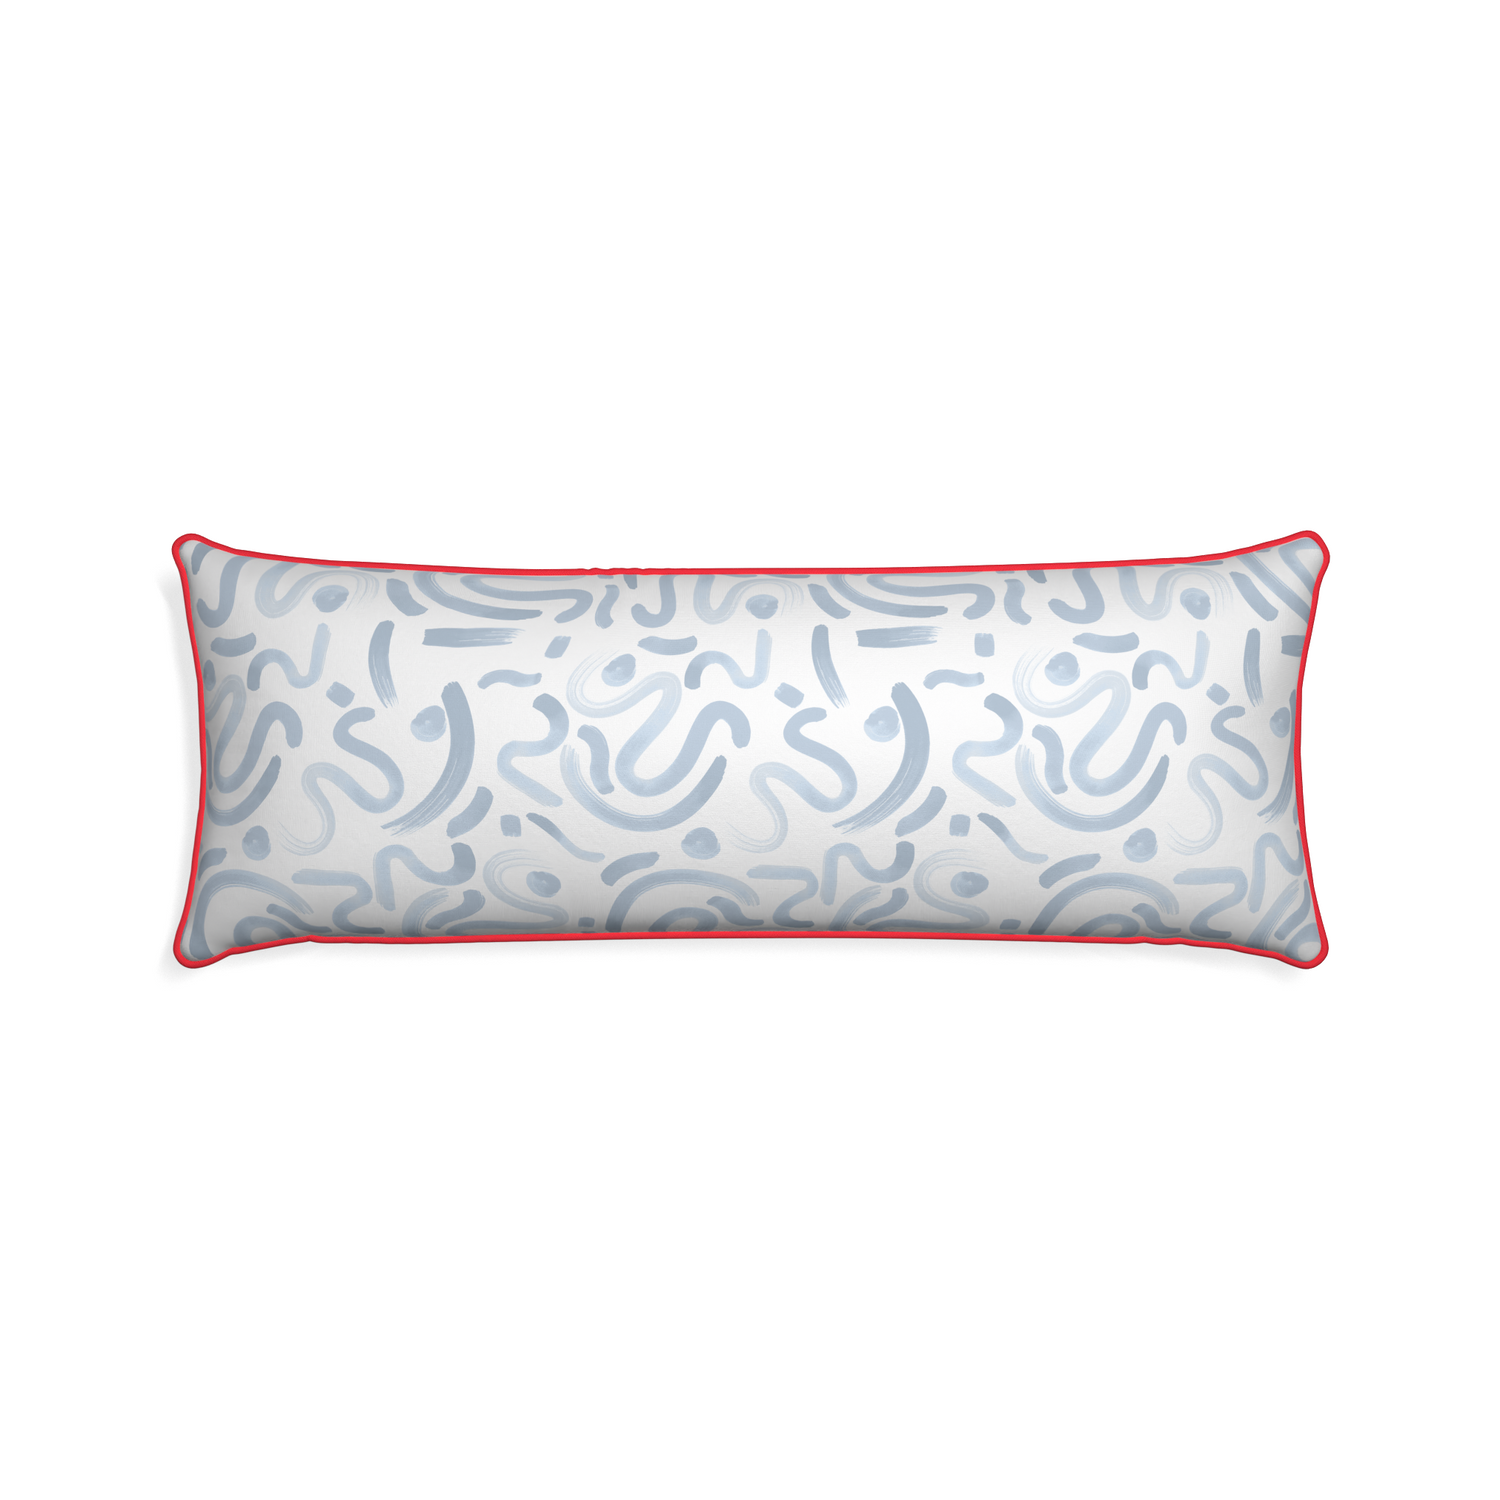 Xl-lumbar hockney sky custom pillow with cherry piping on white background